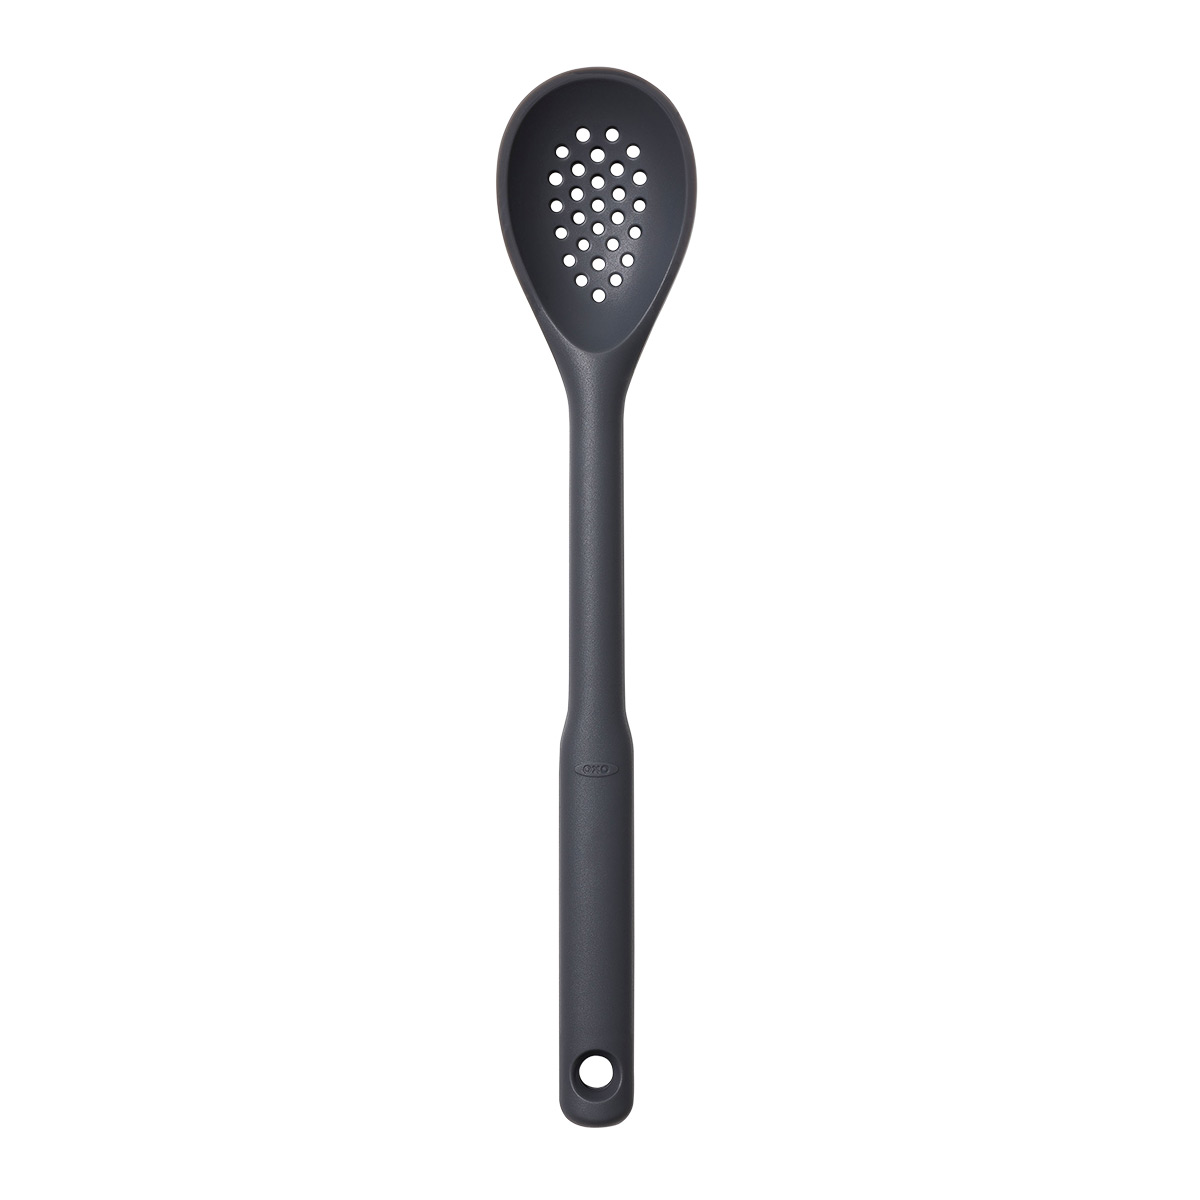 https://www.containerstore.com/catalogimages/490638/10095506-oxo-gg_11281600_2-silicone-.jpg